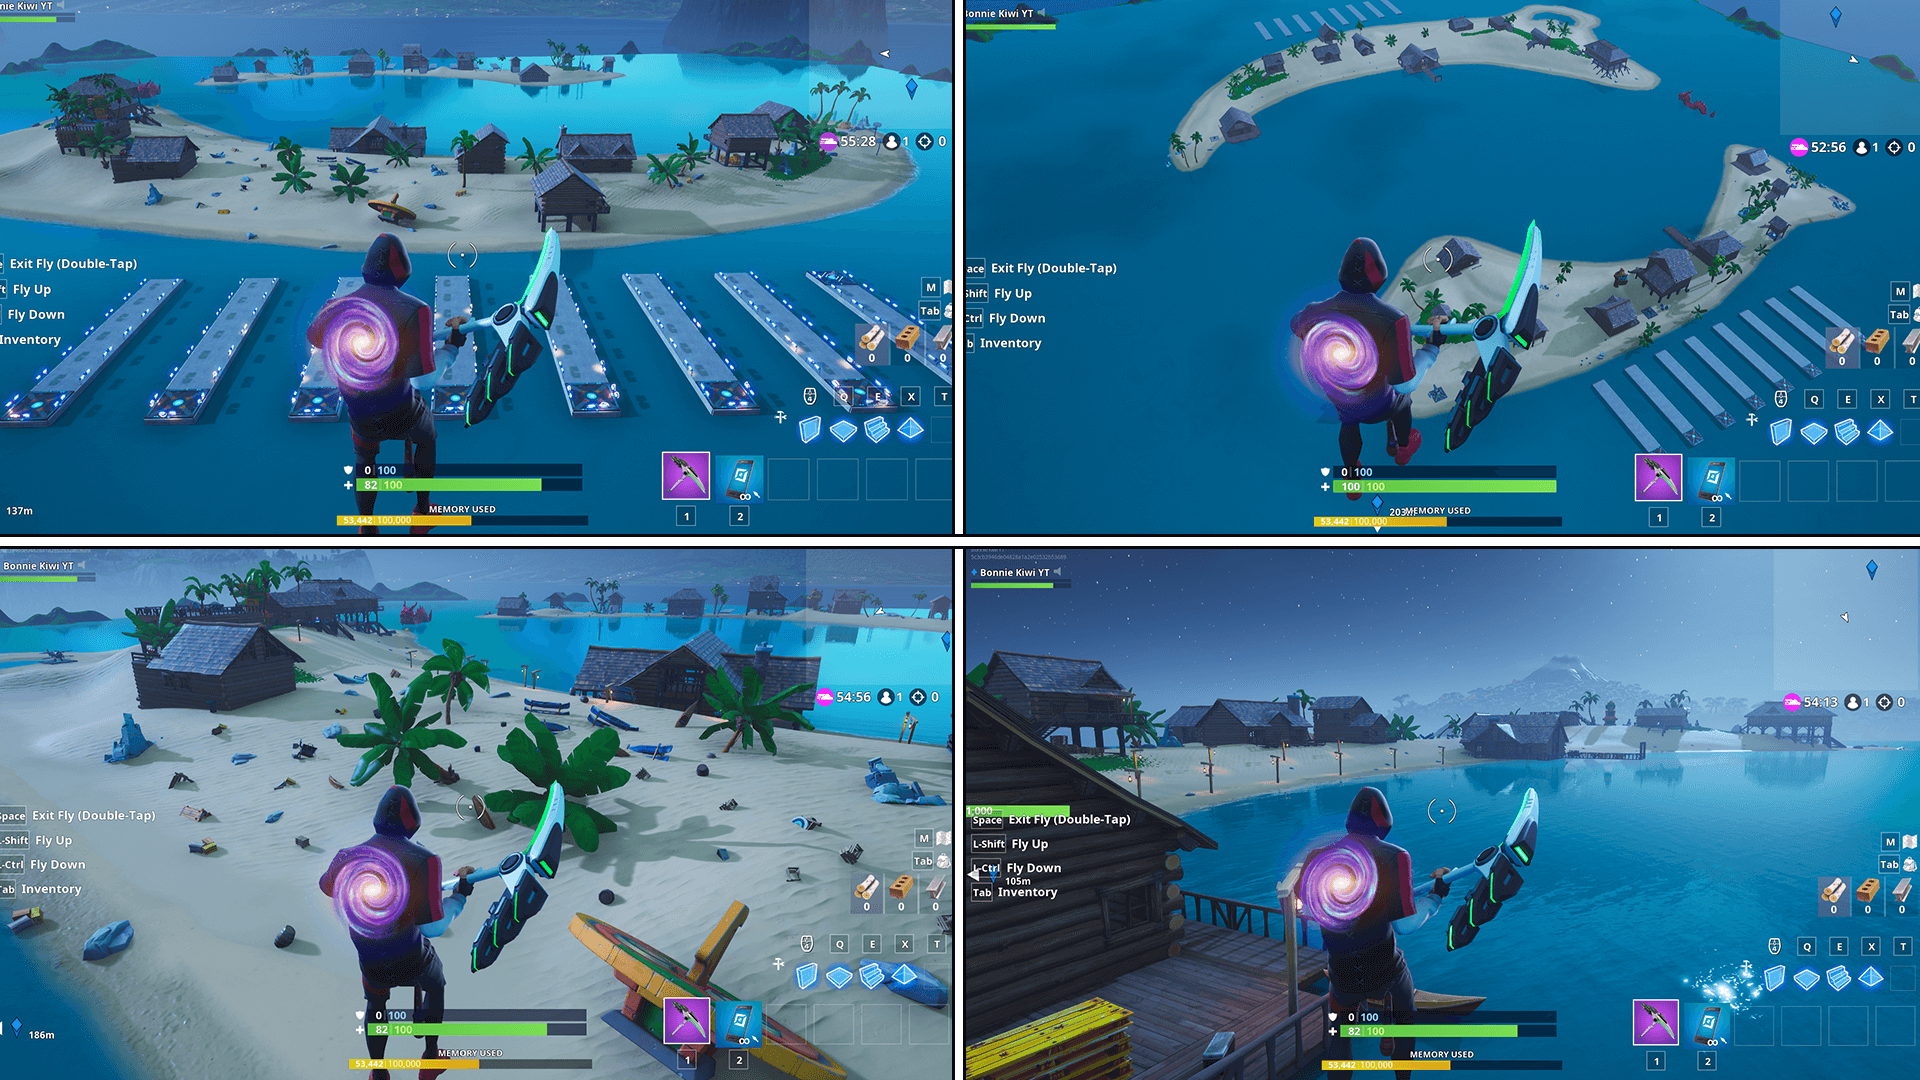 Bed Wars 7048-8422-2298 by theboydilly - Fortnite Creative Map Code 